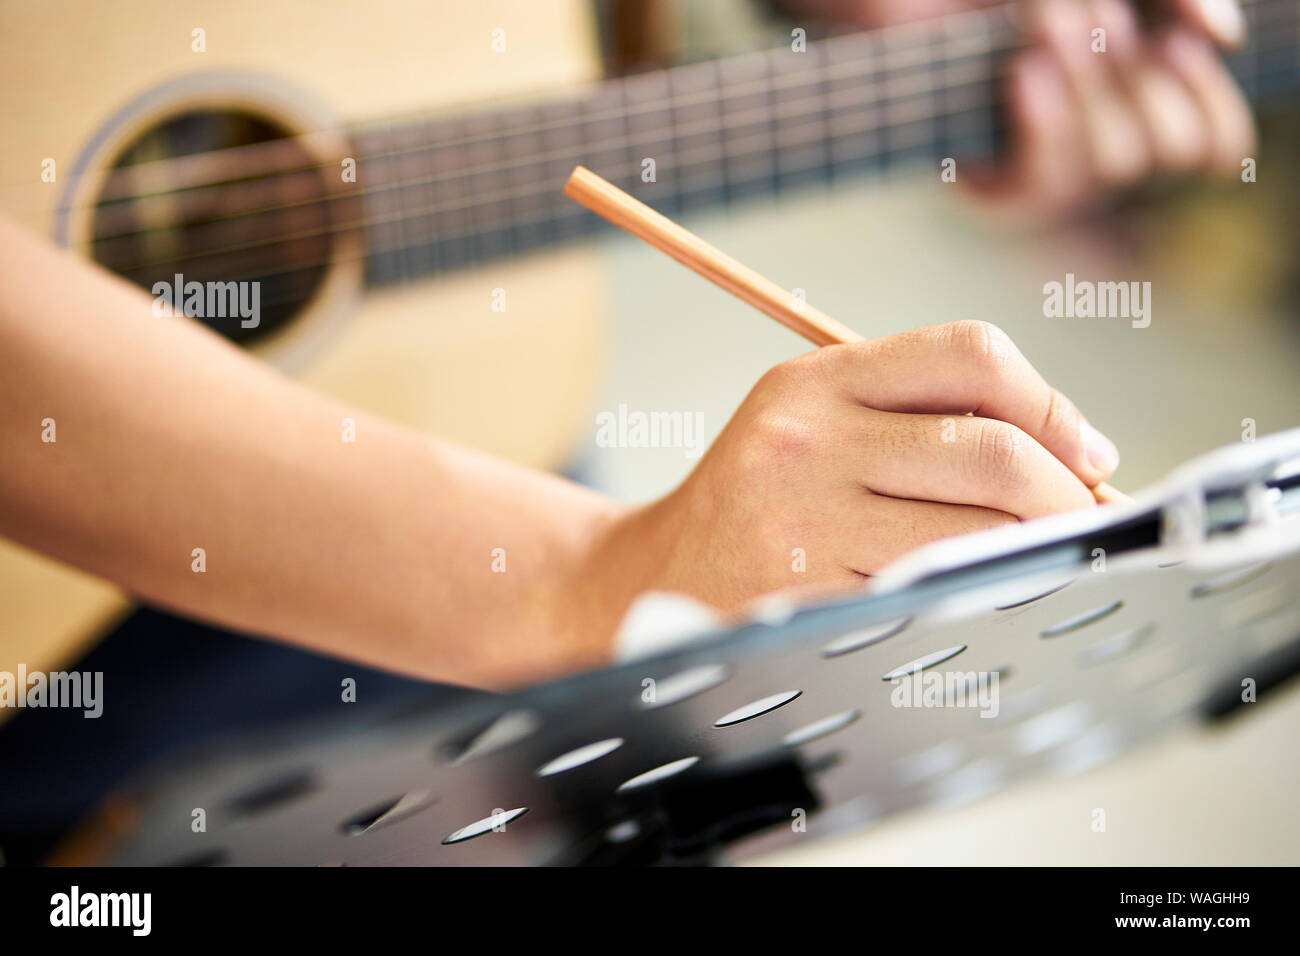 close-up shot of hand of a guitarist taking notes while composing music Stock Photo